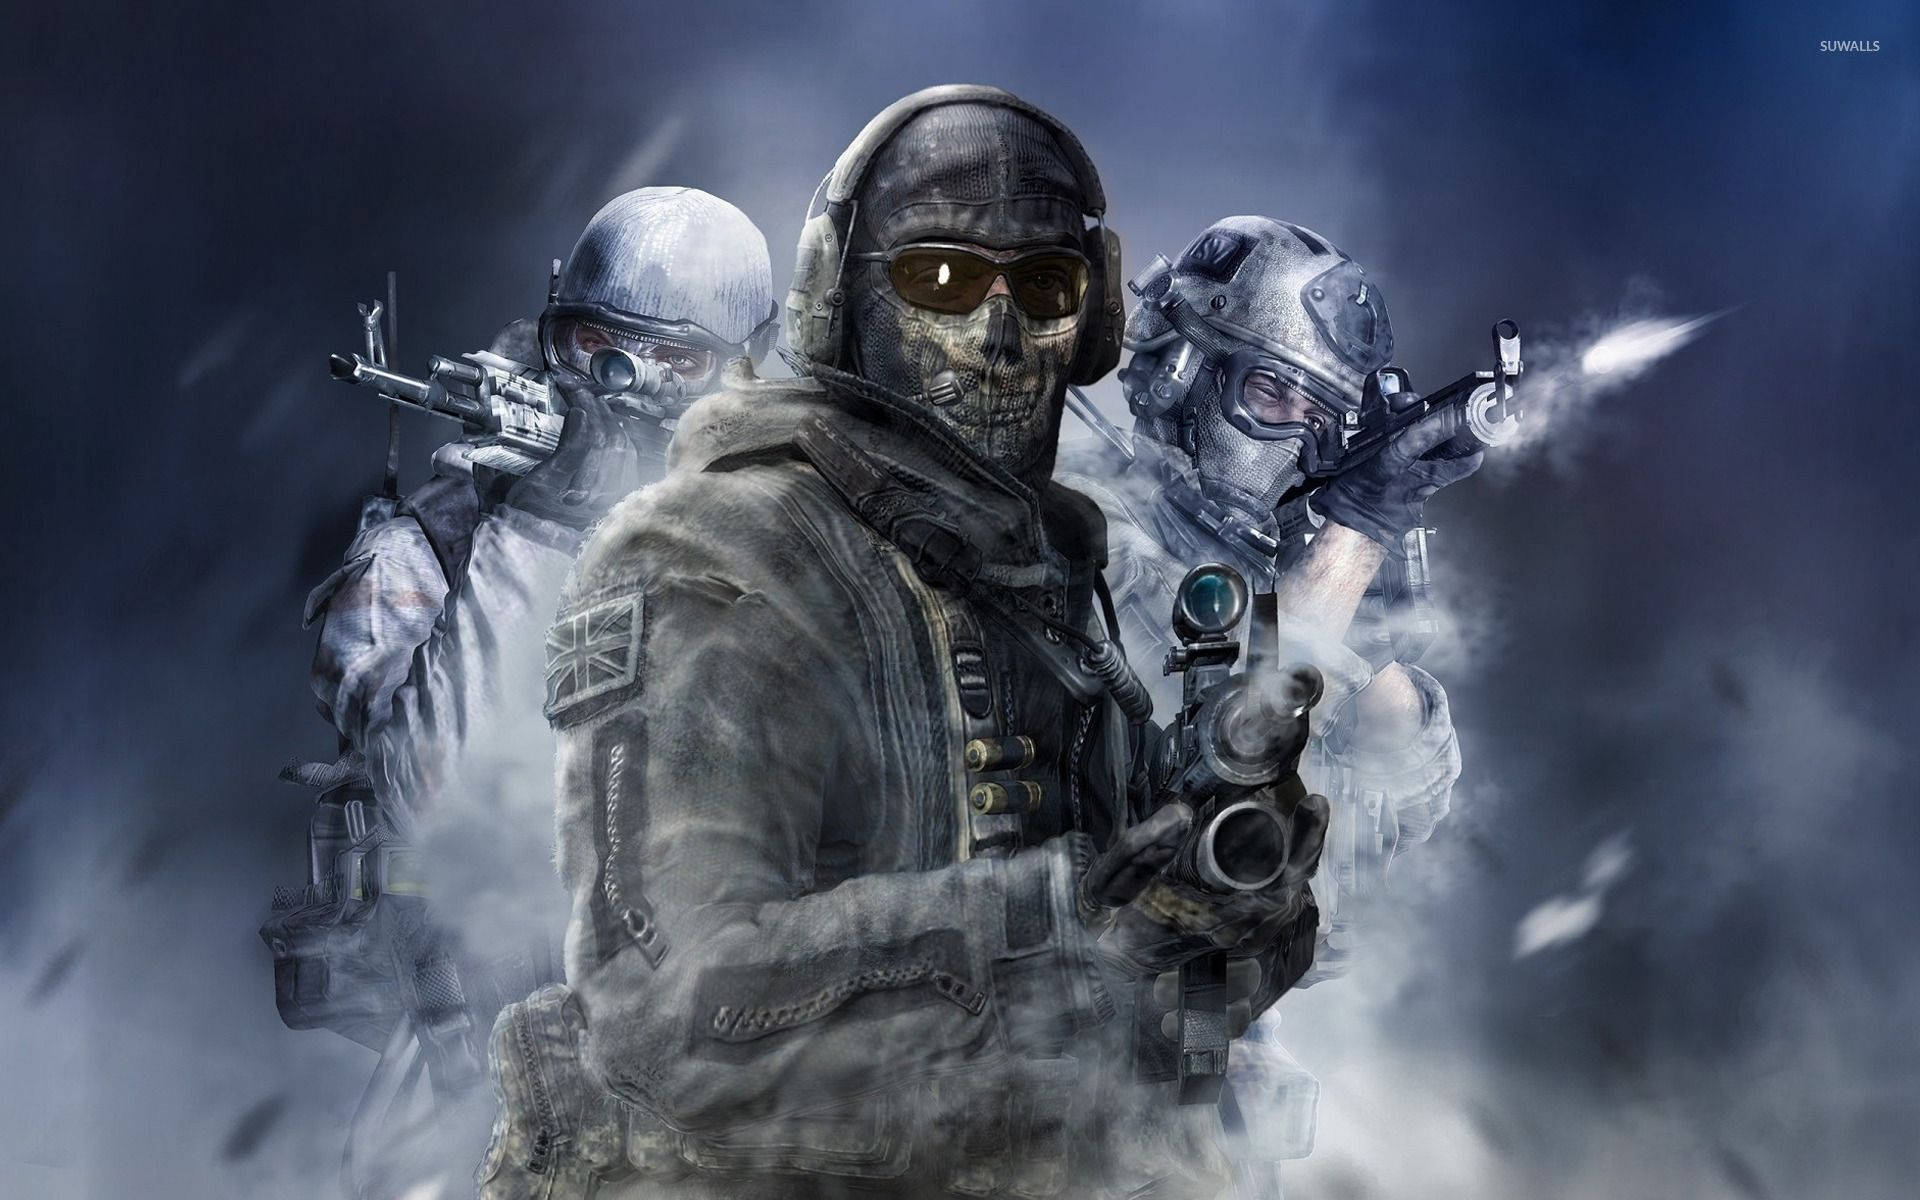 Free Call Of Duty Wallpaper Downloads, Call Of Duty Wallpaper for FREE